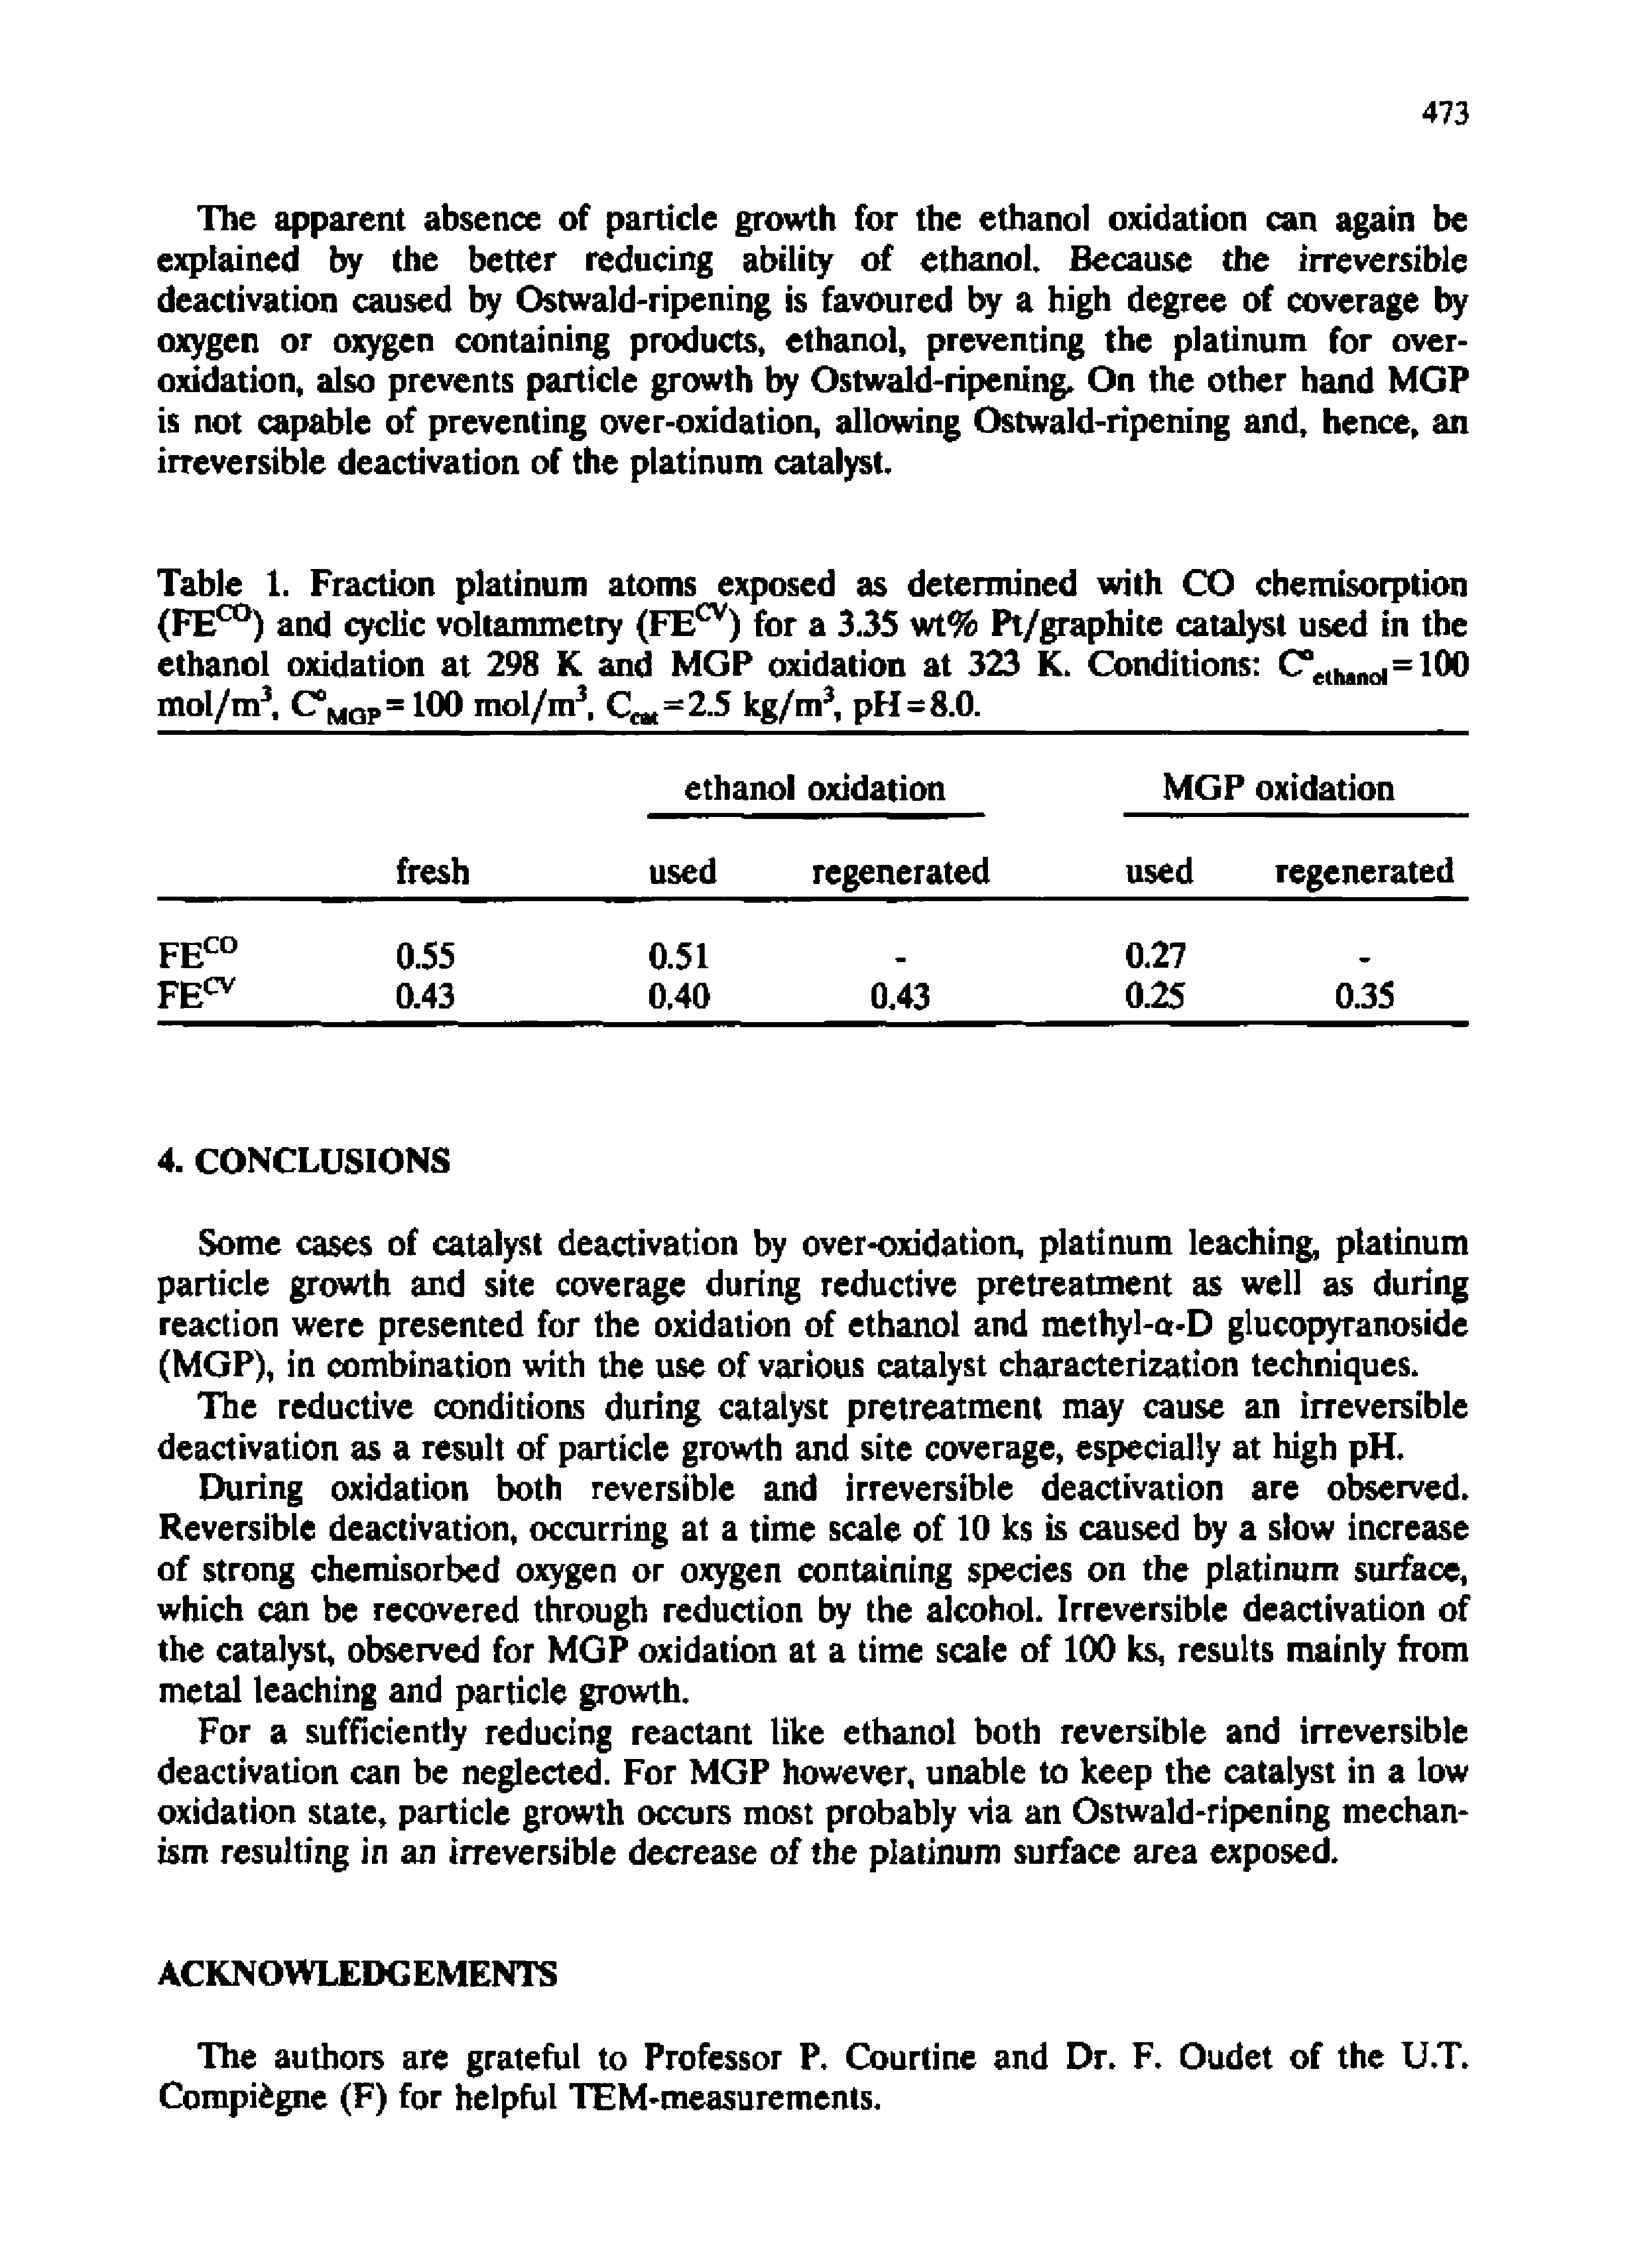 Table 1. Fraction platinum atoms exposed as determined with CO chemisorption (FE00) and cyclic voltammetry (FE ) for a 3.35 wt% Pt/graphite catalyst used in the ethanol oxidation at 298 K and MGP oxidation at 323 K. Conditions C°eth(ino,=100 mol/m3 C°MQP= 100 mol/m3, Q - 2.5 kg/m3, pH-8.0.